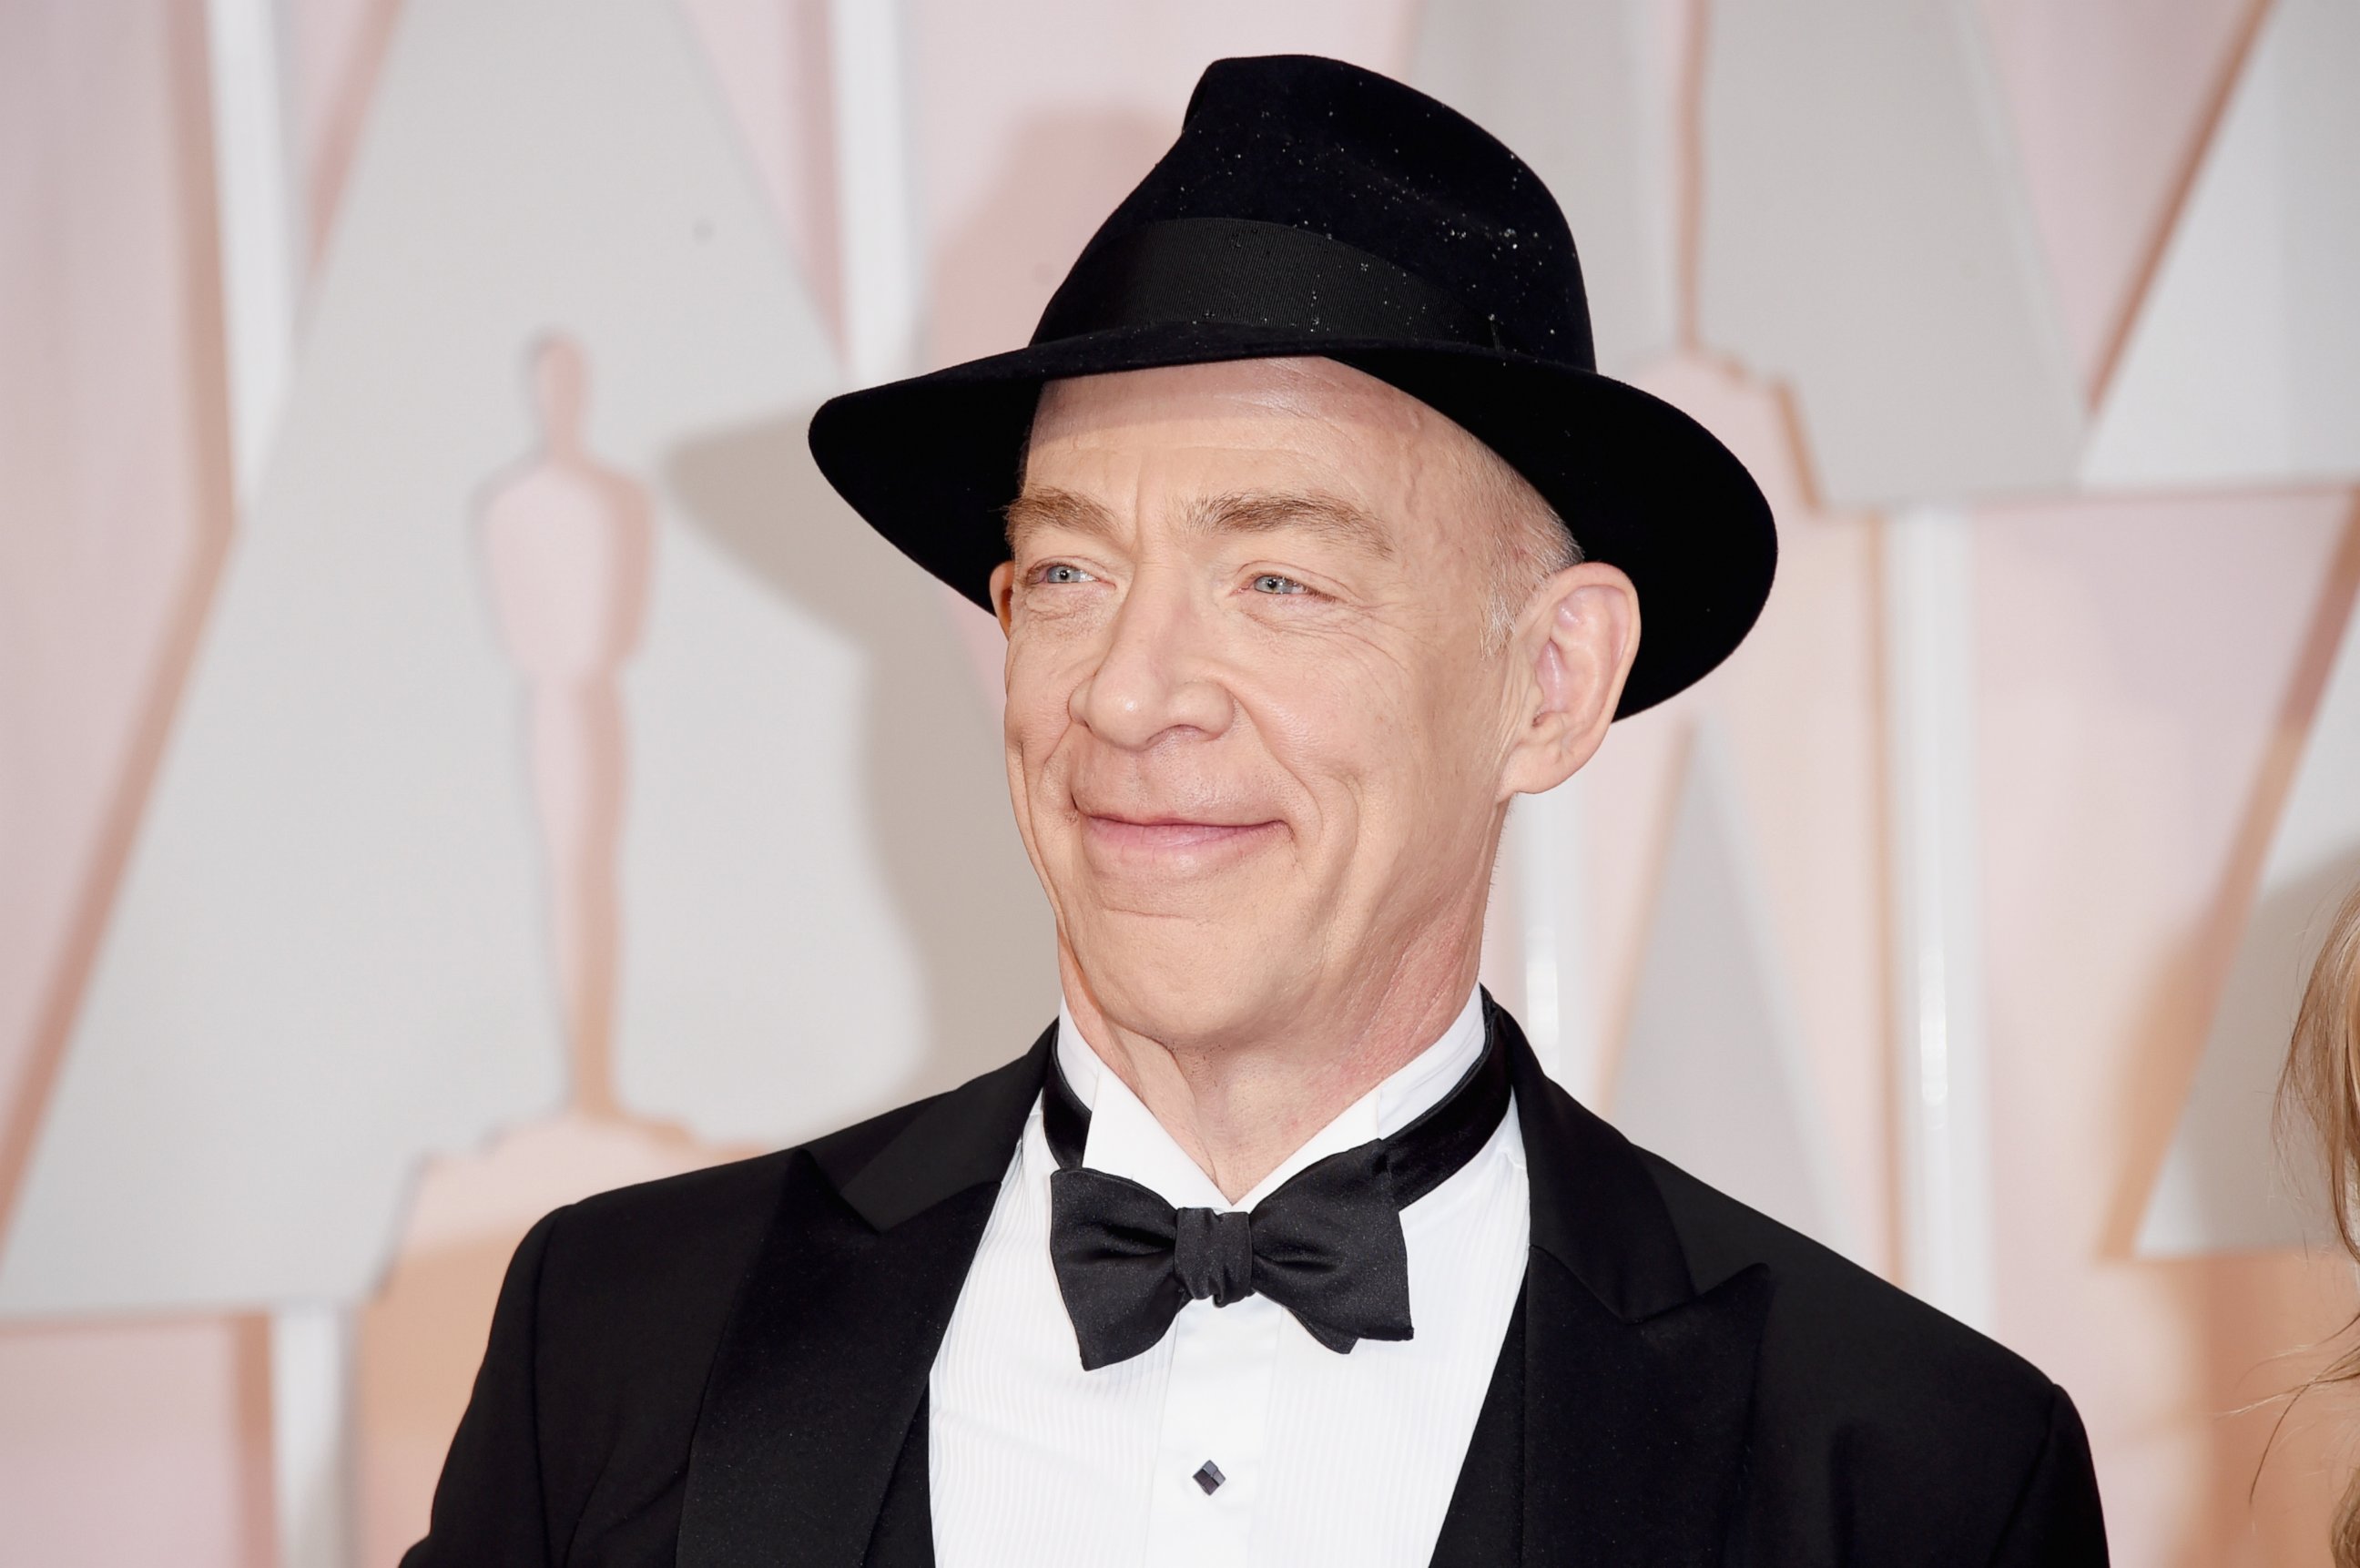 PHOTO: J.K. Simmons attends the 87th Annual Academy Awards at Hollywood & Highland Center on Feb. 22, 2015 in Hollywood, Calif.